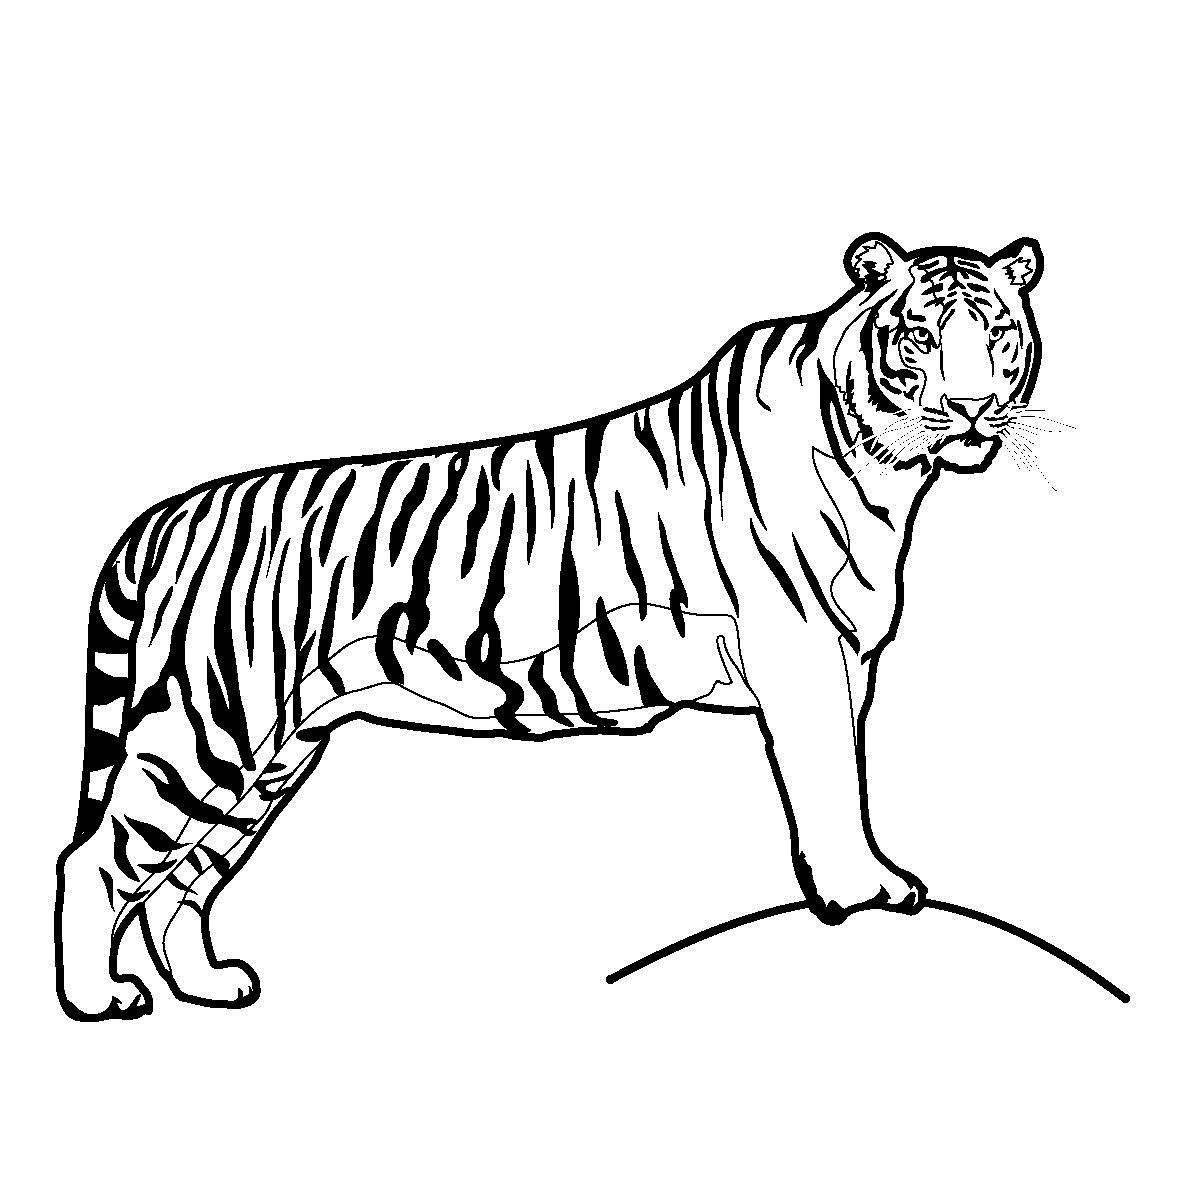 Richly colored red book siberian tiger coloring book